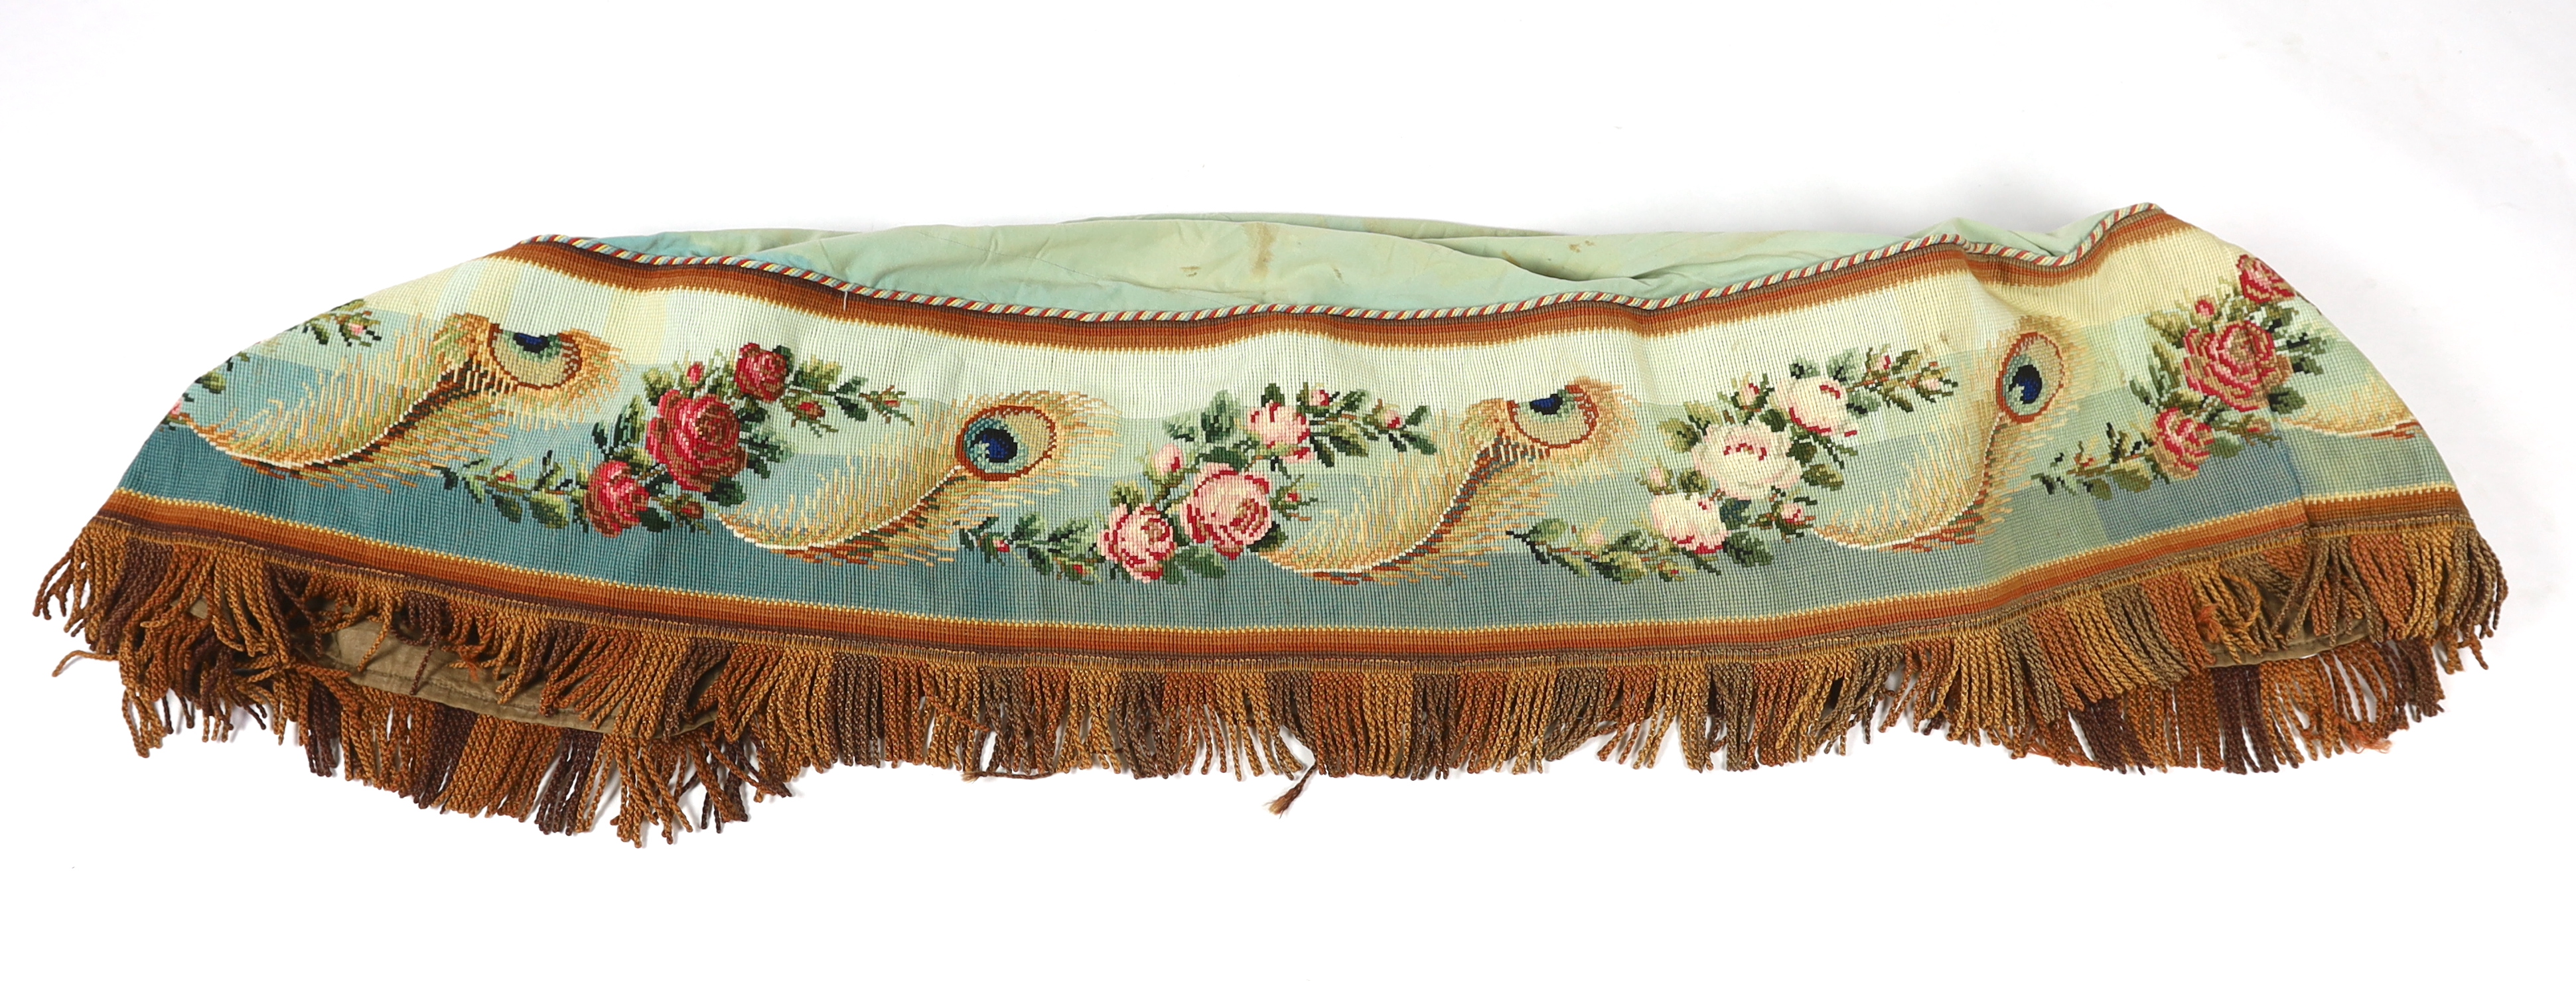 A 19th century Berlin hand wool worked floral and peacock feather designed border, with a deep fringe and cording along the top edge, used as the outer edge/border to a plain cotton turquoise table cover, the wool work a